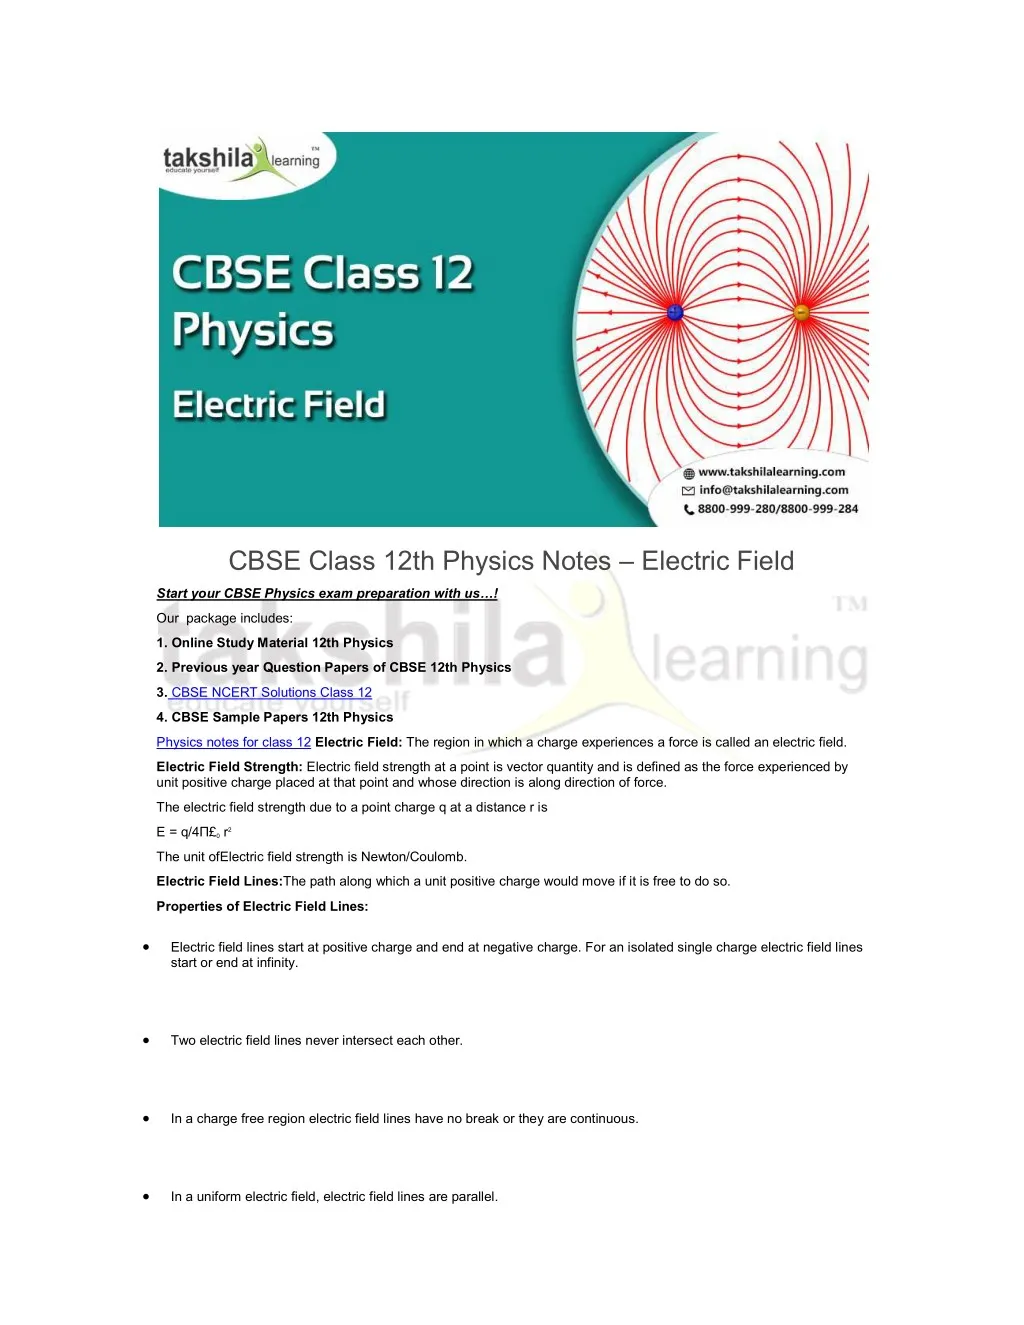 cbse class 12th physics notes electric field